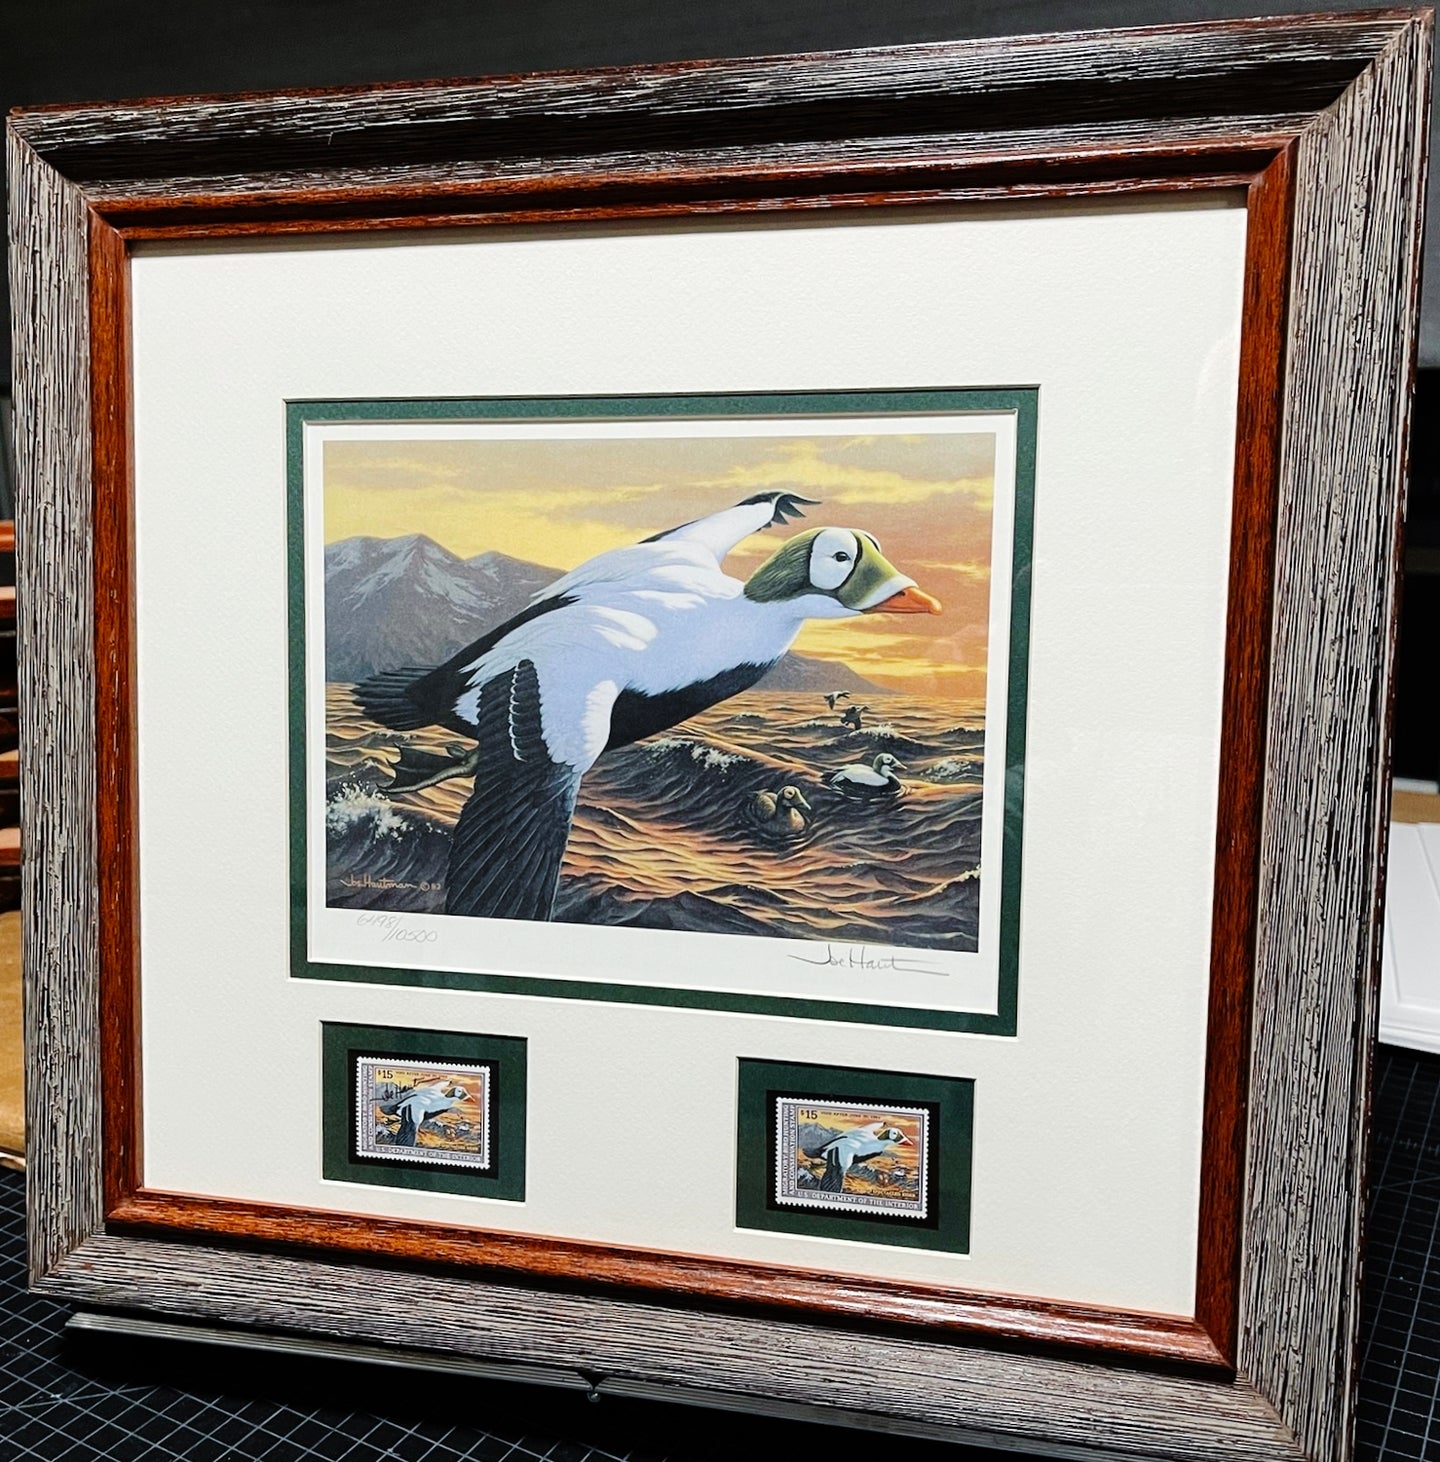 Joe Hautman - 1992 Federal Migratory Duck Stamp Print With Double Stamps - Brand New Custom Sporting Frame